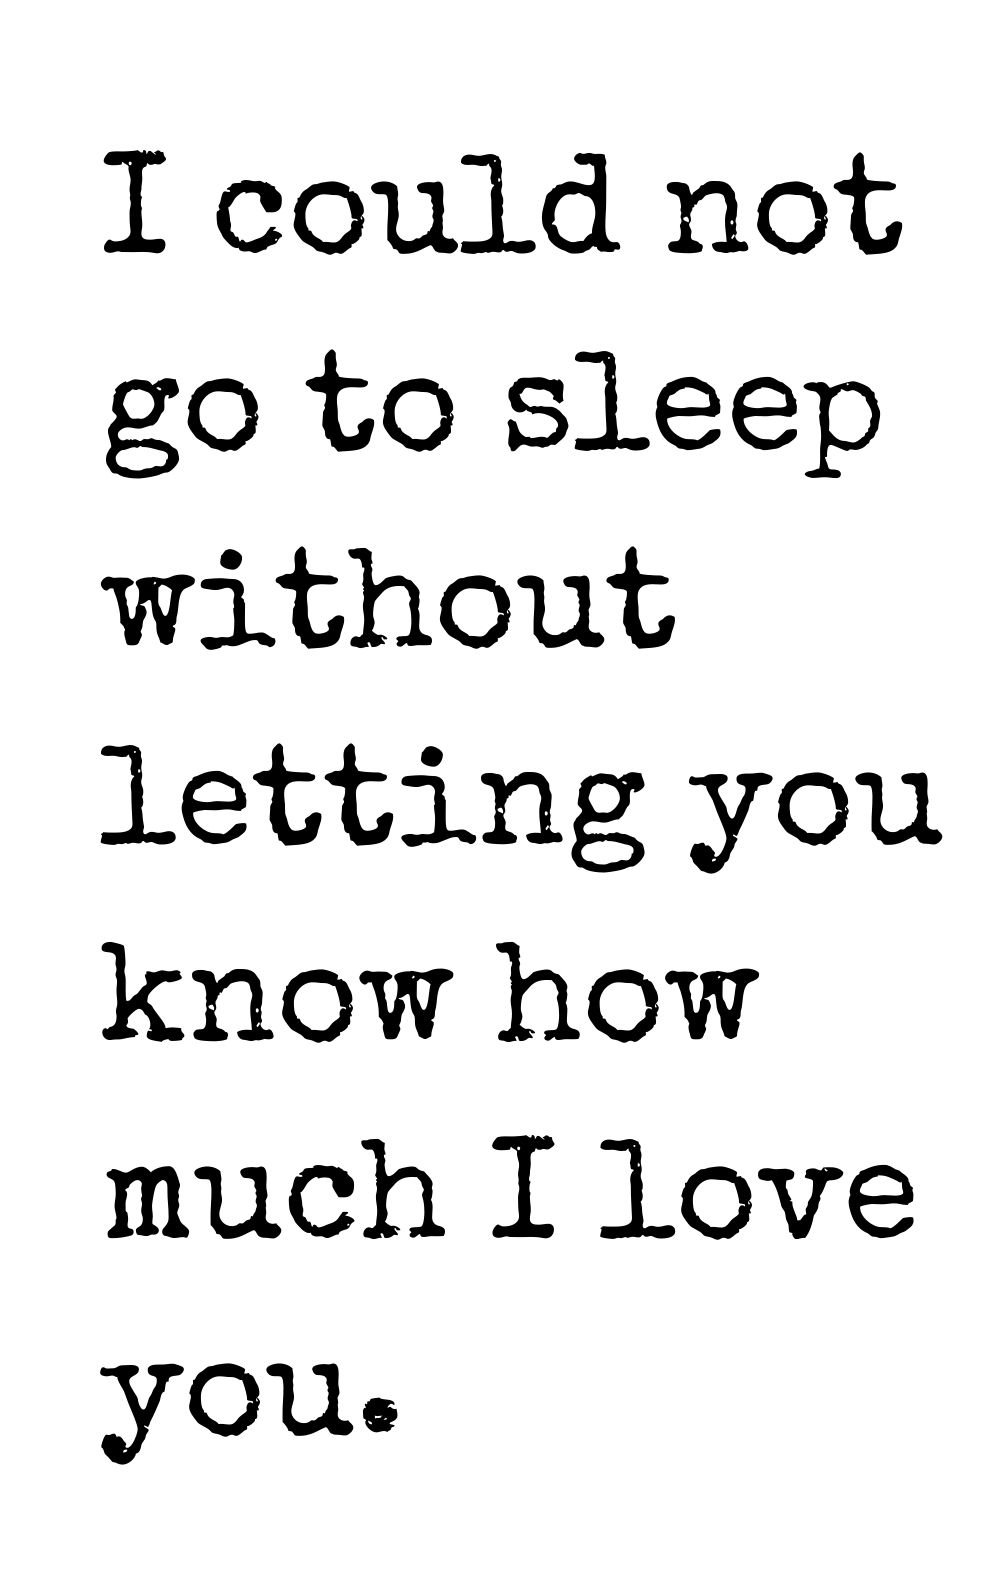 i could not go to sleep without letting you know how much i love you